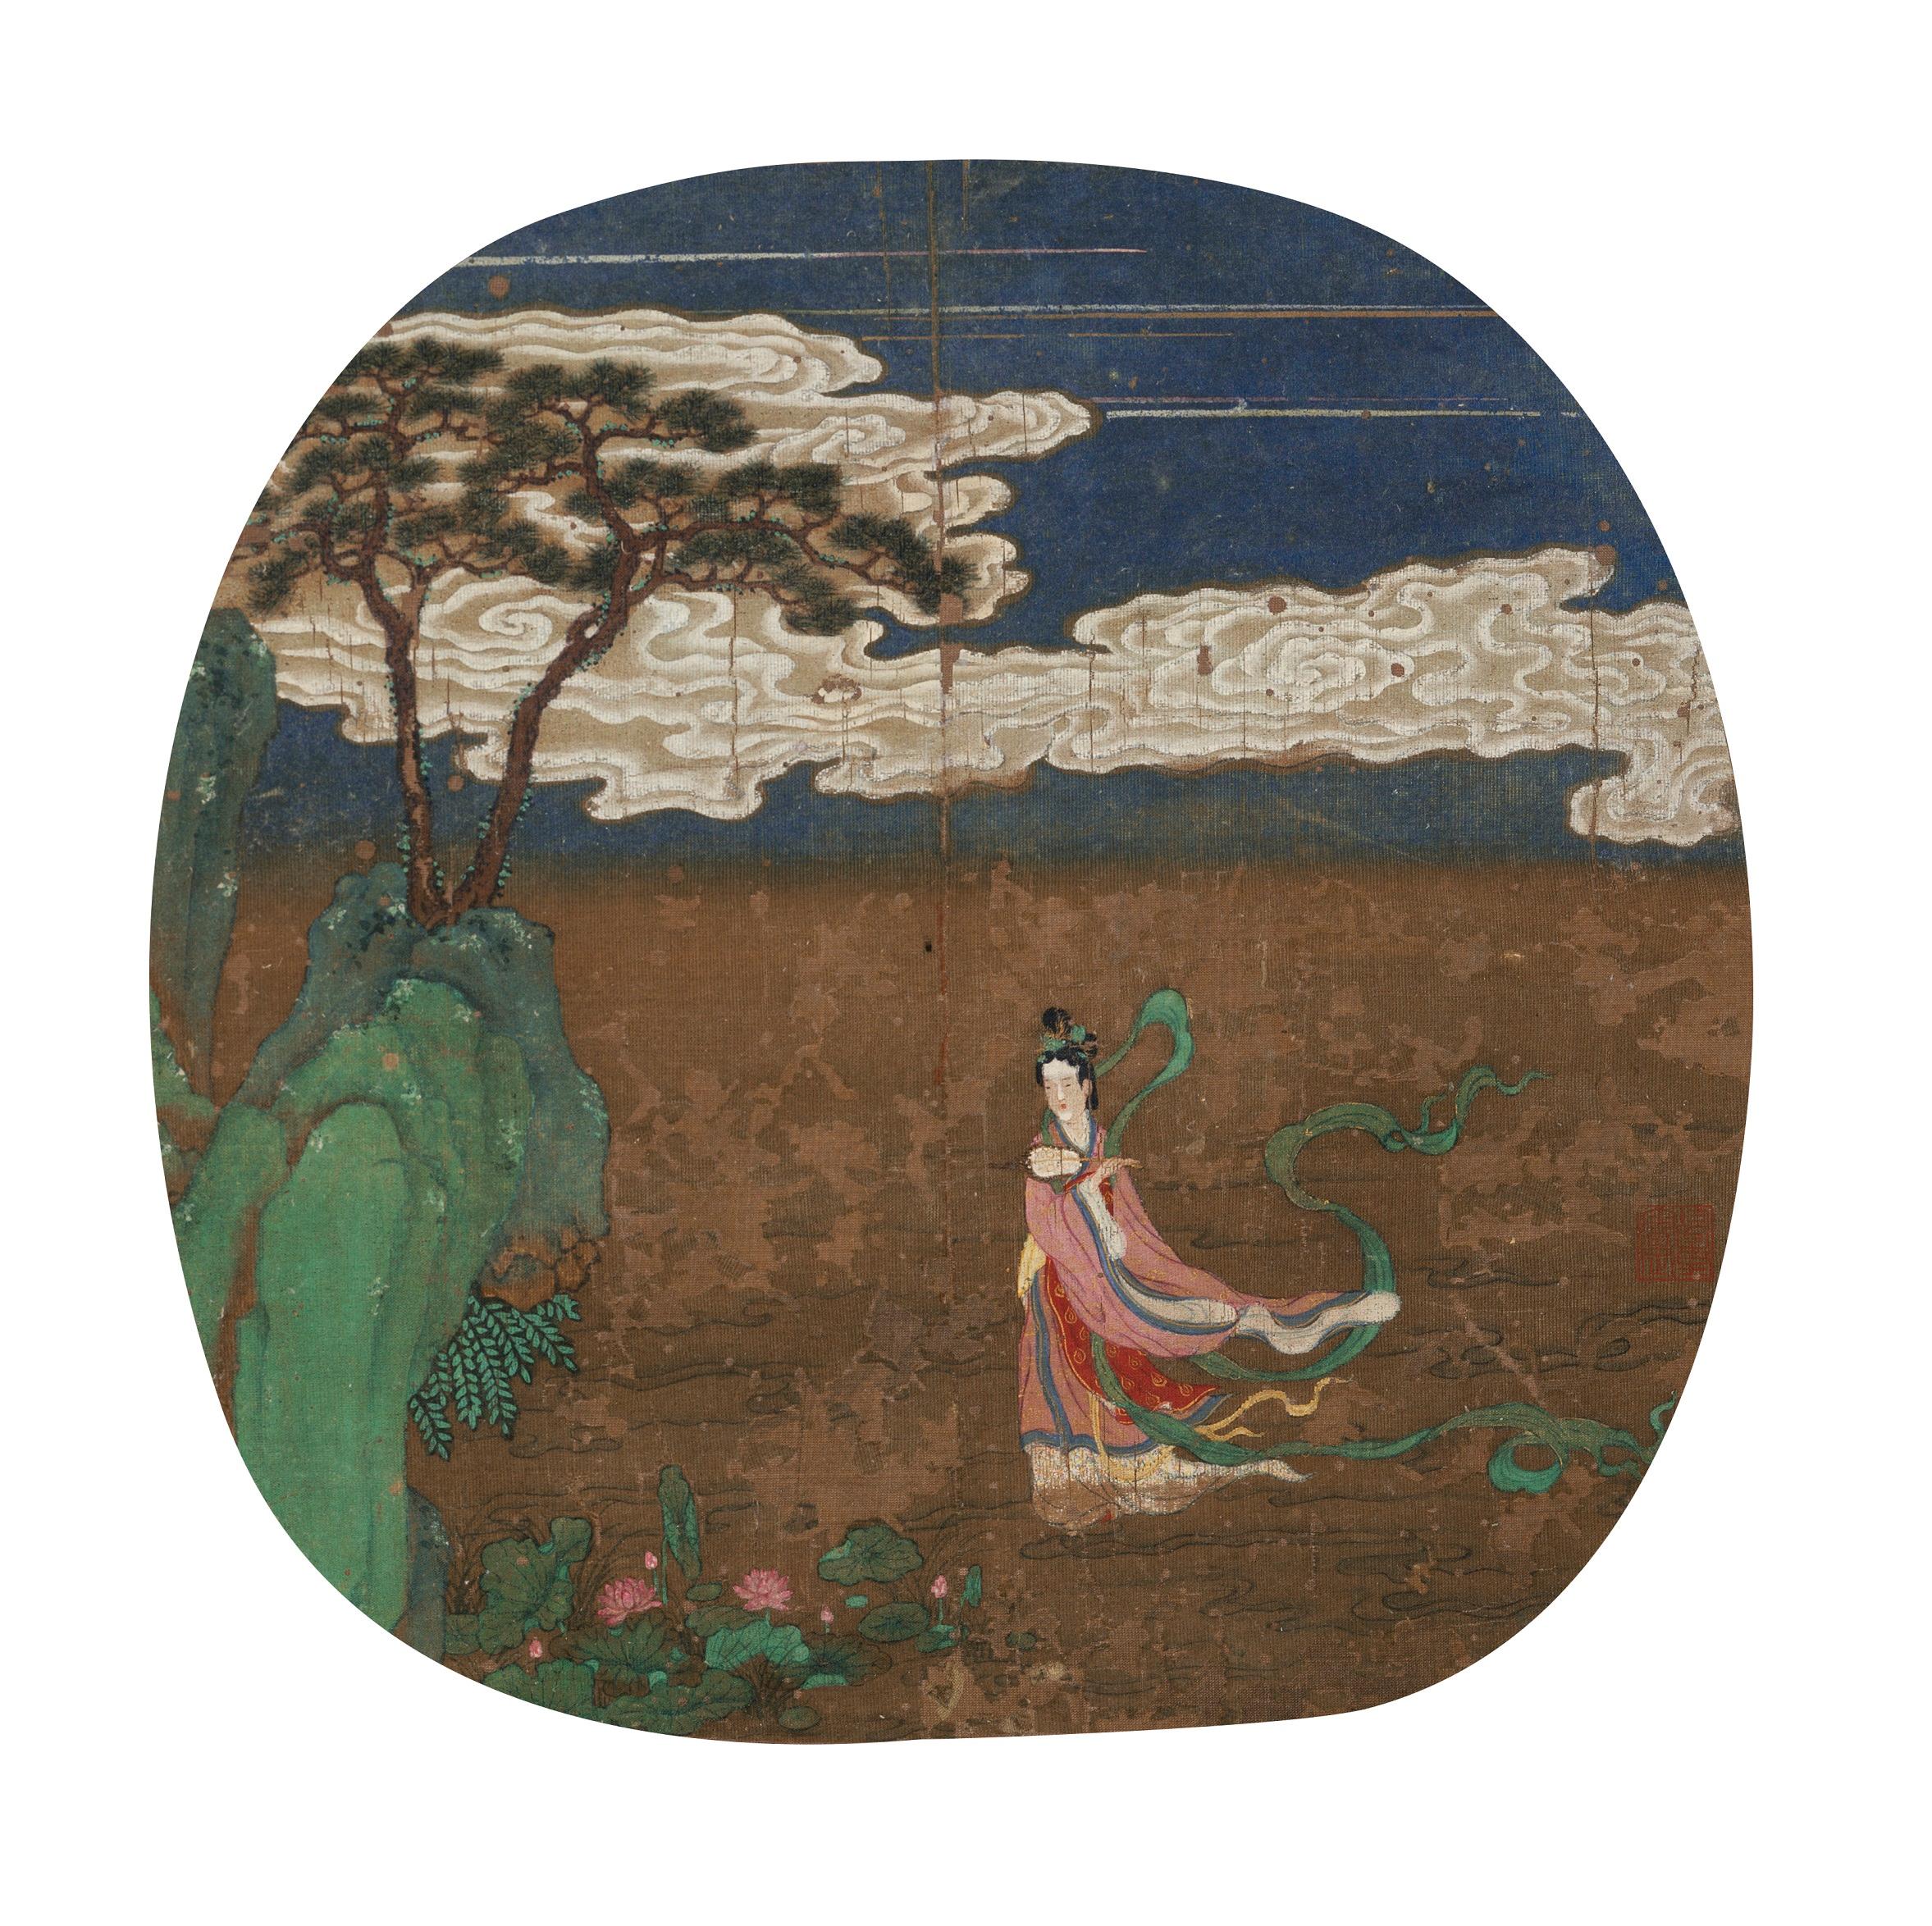 "Love Letters: Everlasting Sentiments from the Xubaizhai Collection" is now on stage at the Hong Kong Museum of Art (HKMoA). With love letters as the theme, the HKMoA invites audiences to discover the reserved and implicit emotions encapsulated in Chinese paintings and calligraphy. Picture shows "Nymph of the Luo River" by Anonymous.